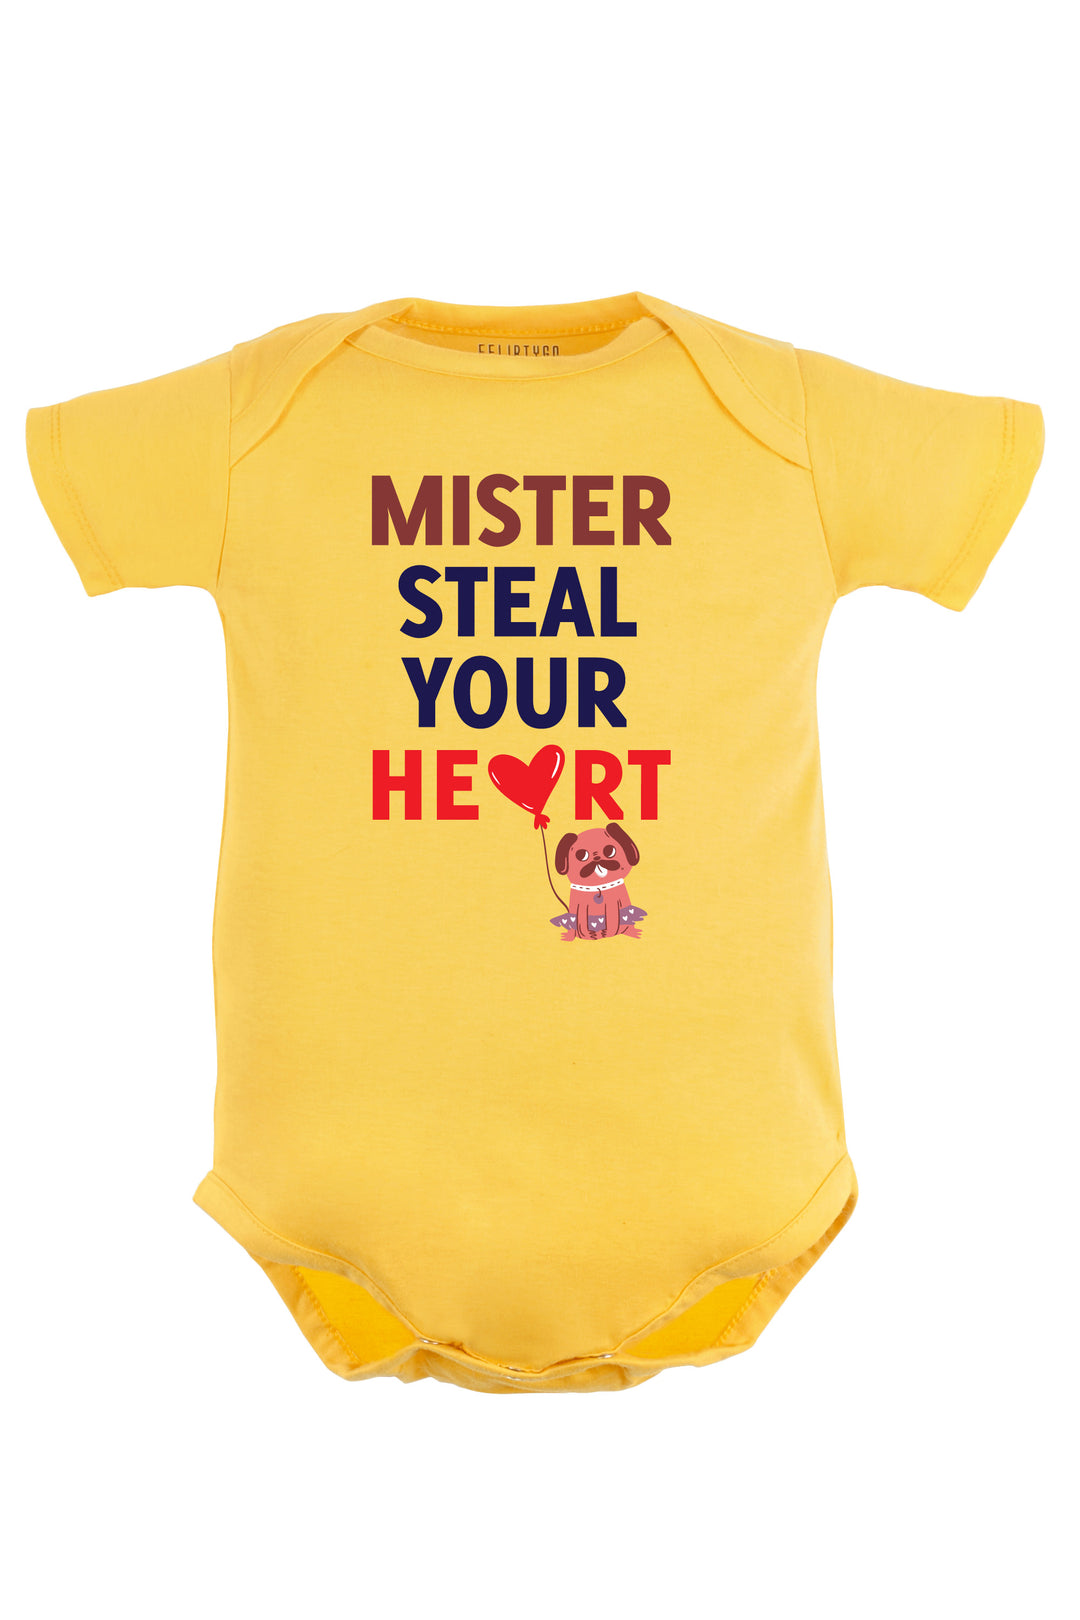 Mister Steal your heart Baby Romper | Onesies